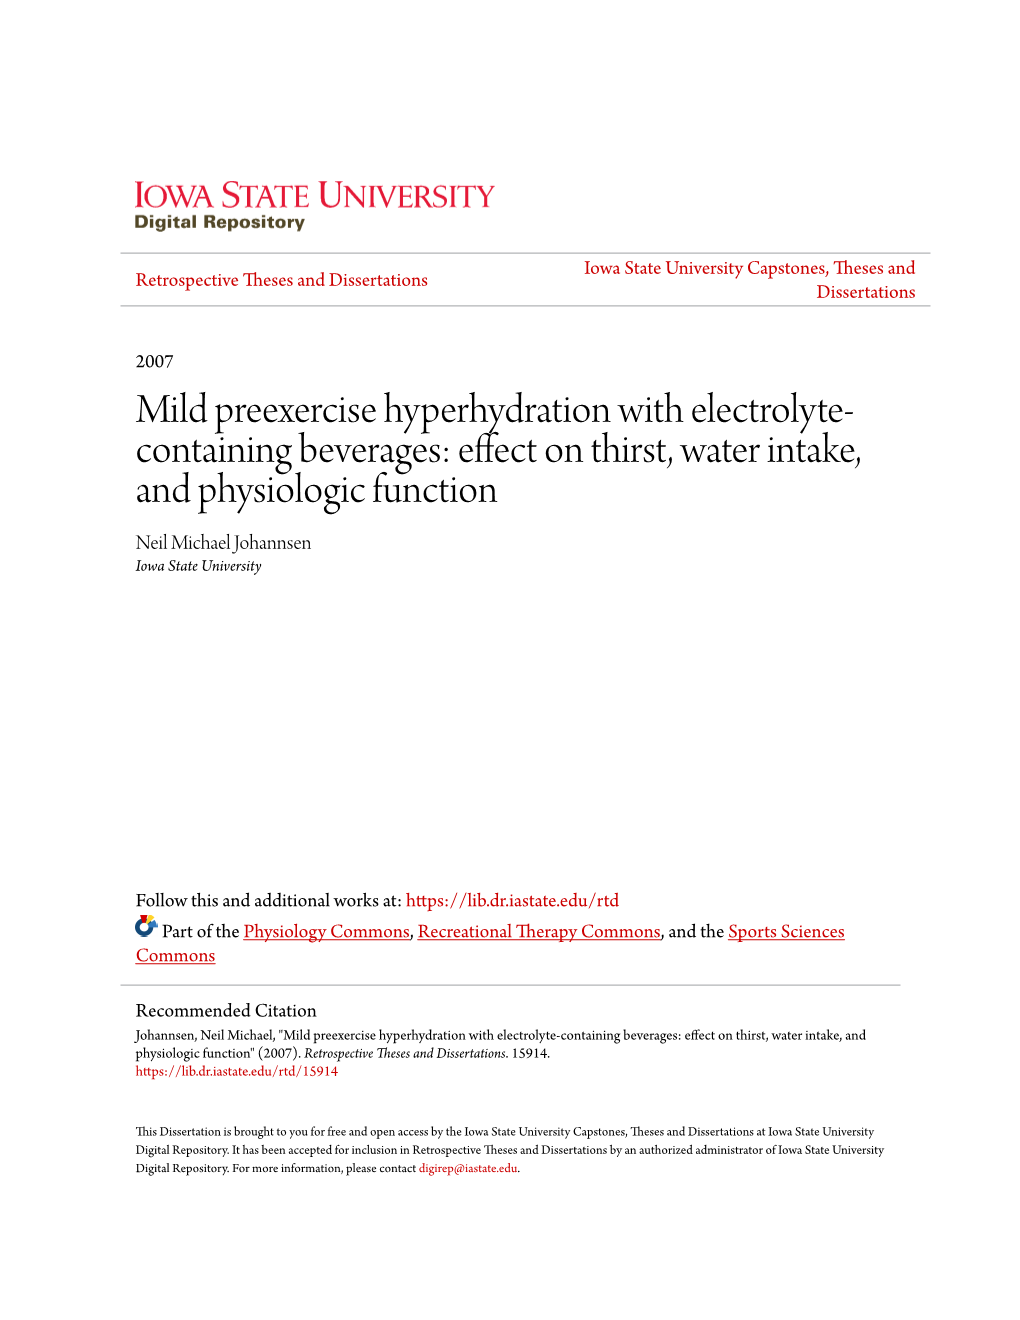 Mild Preexercise Hyperhydration with Electrolyte-Containing Beverages: Effect on Thirst, Water Intake, and Physiologic Function" (2007)